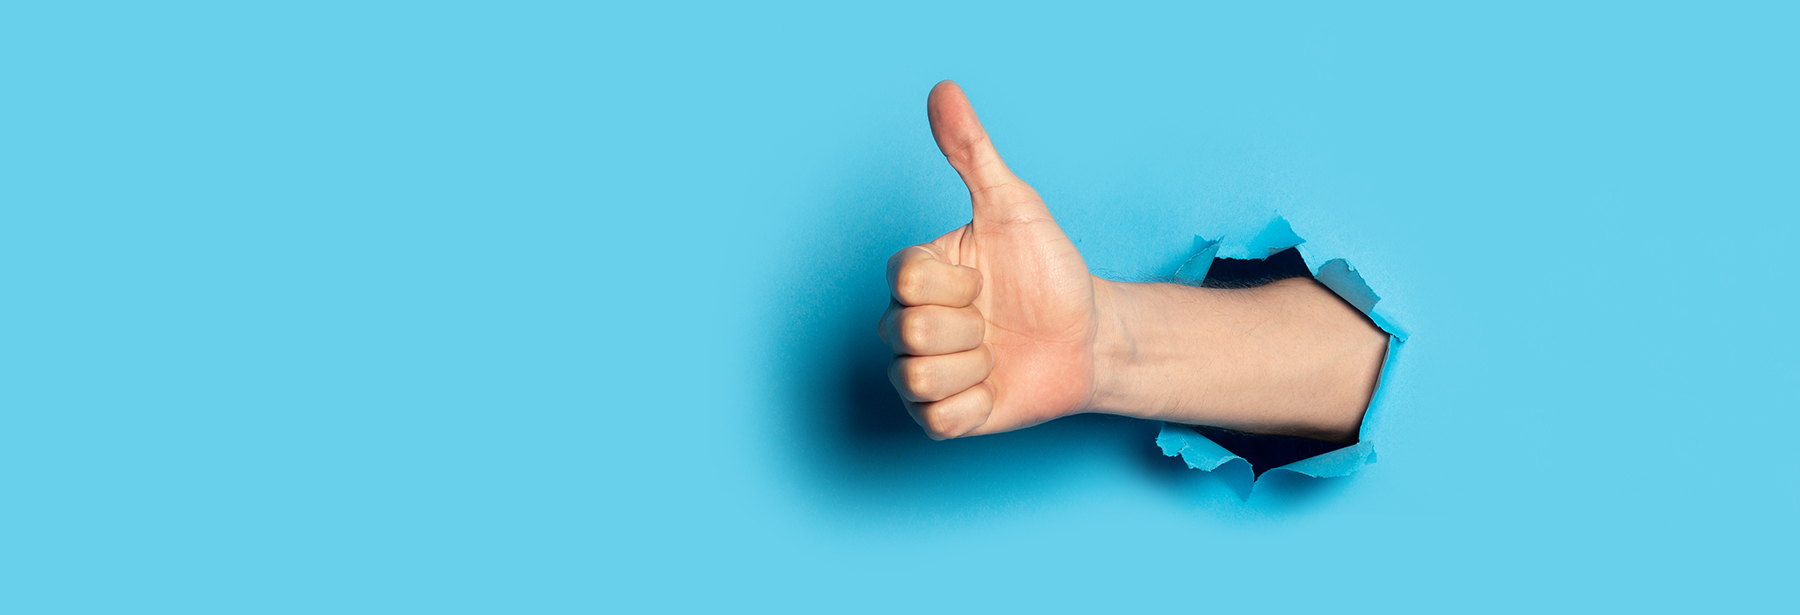 Thumbs Up on Blue Background